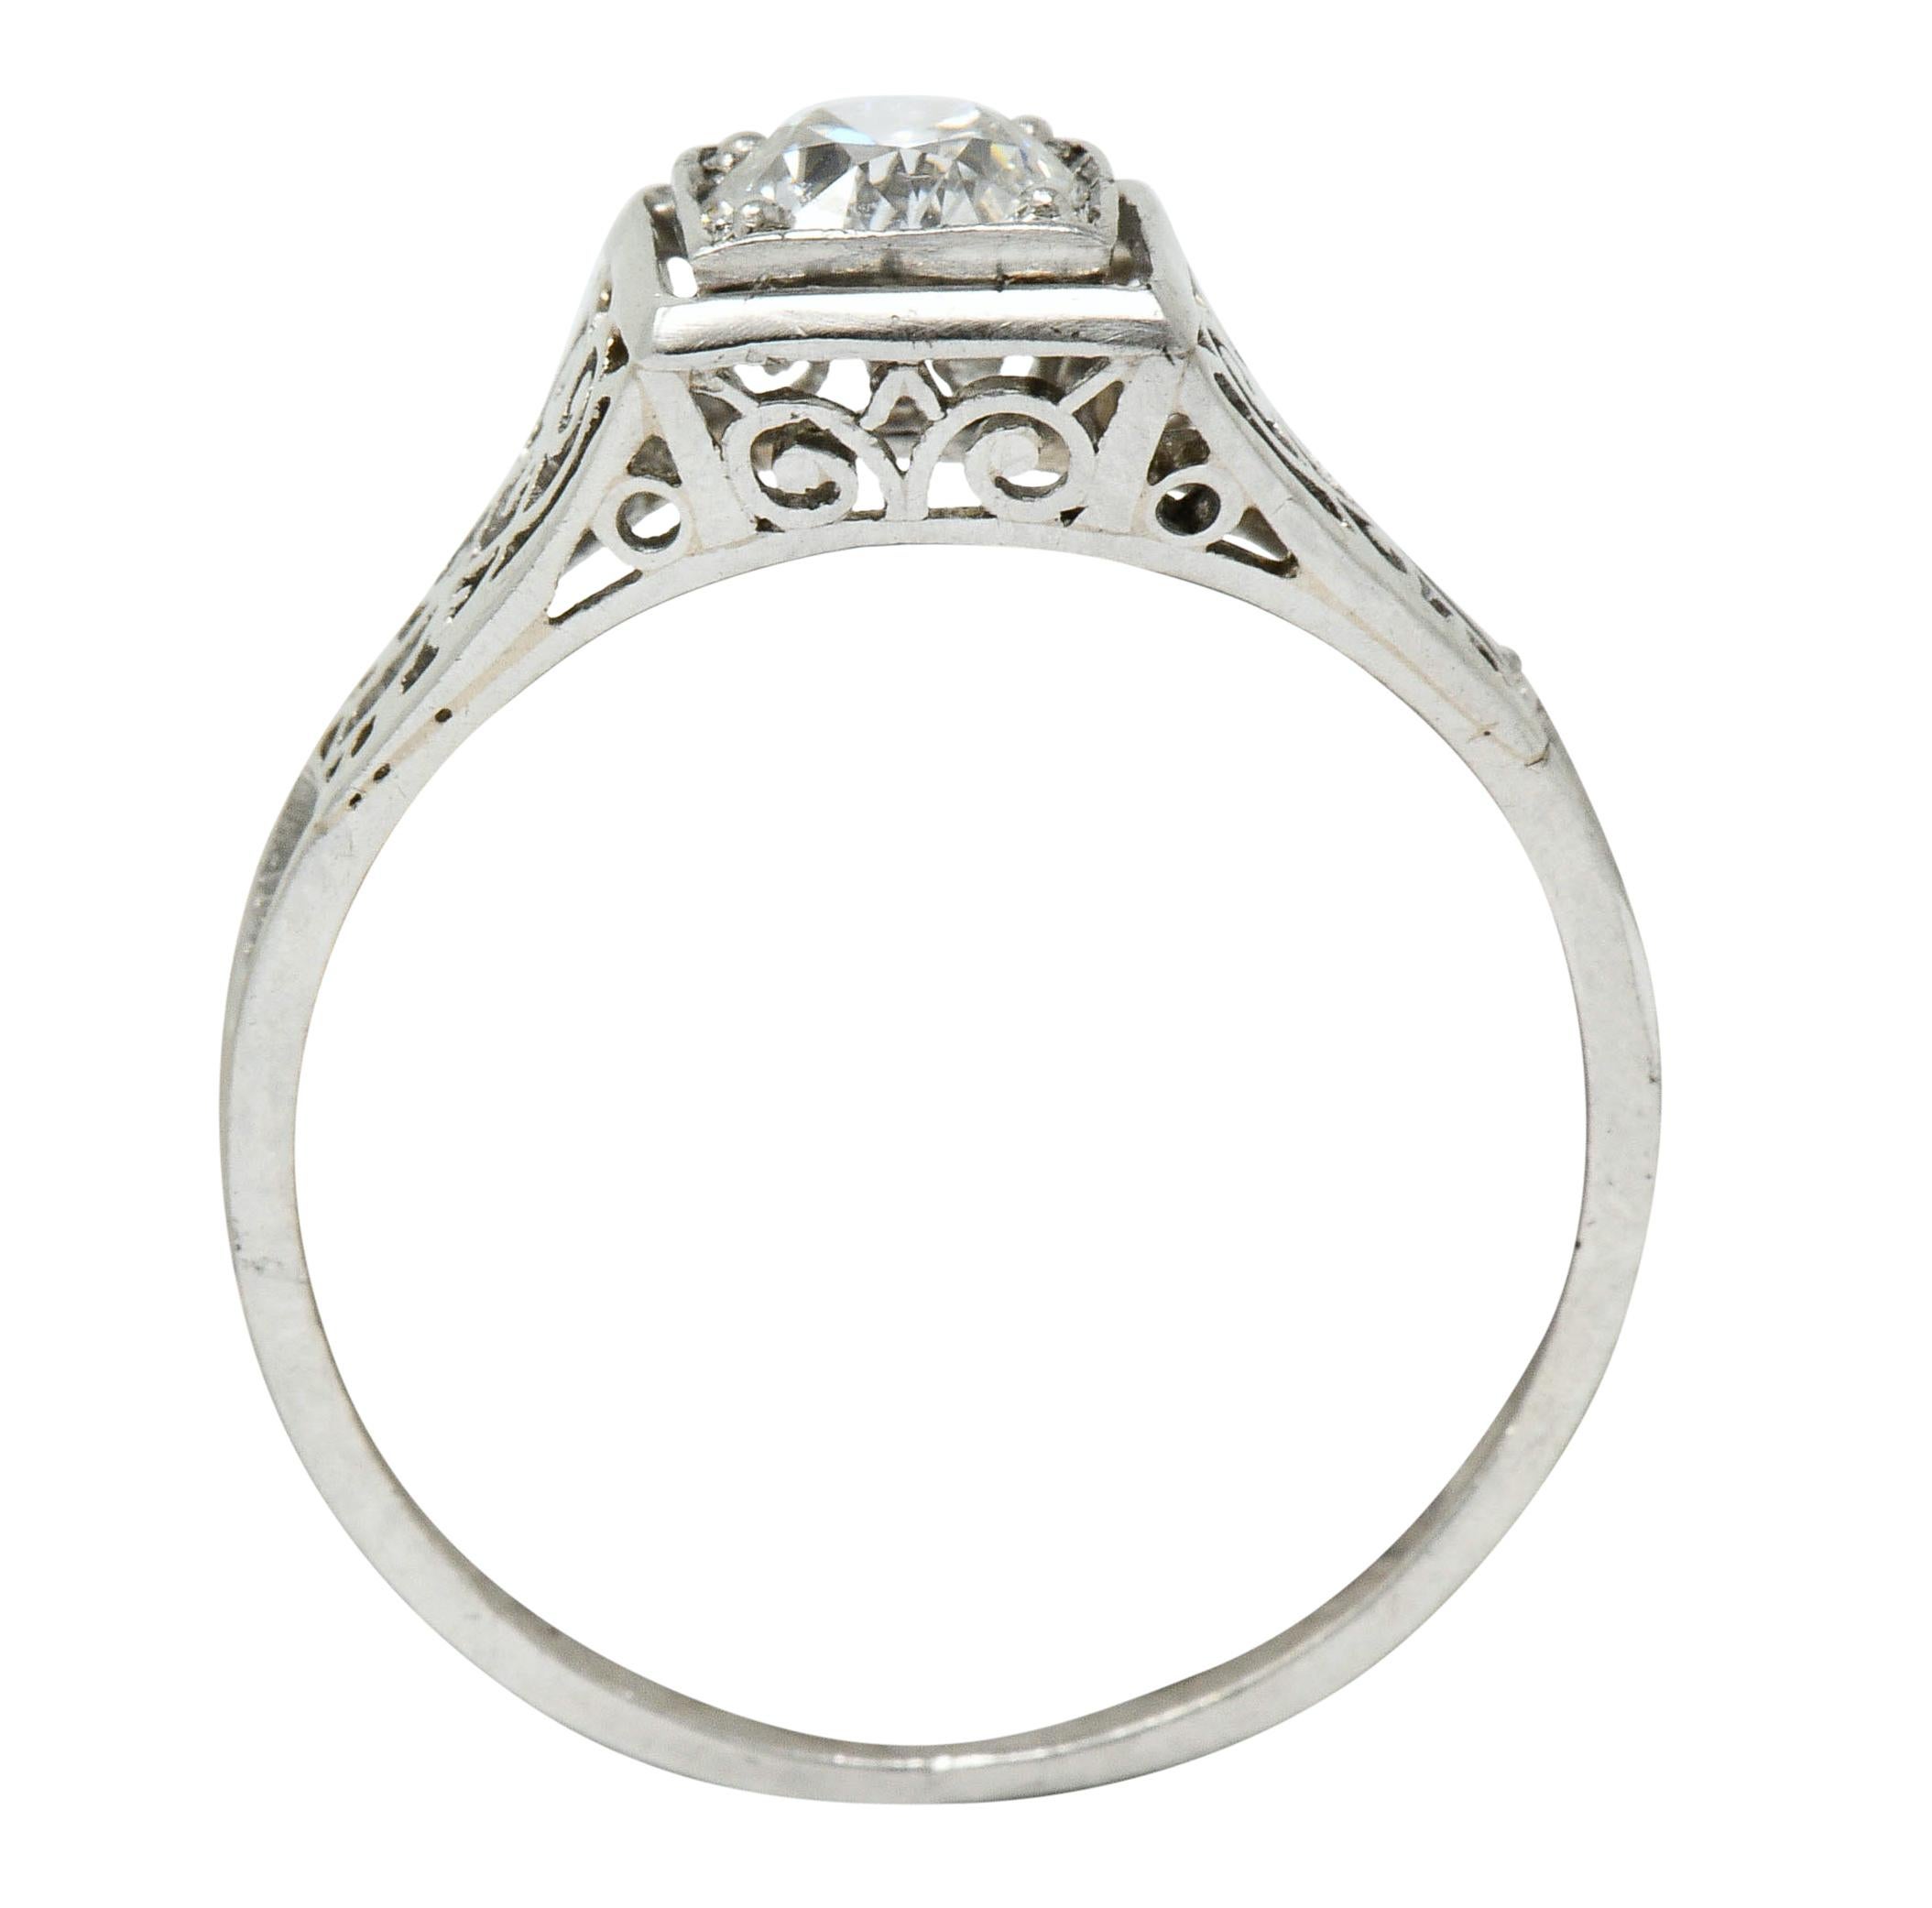 W.W. Fulmer & Co. 0.46 Carat Diamond Platinum Scrolled Heart Engagement Ring For Sale 1